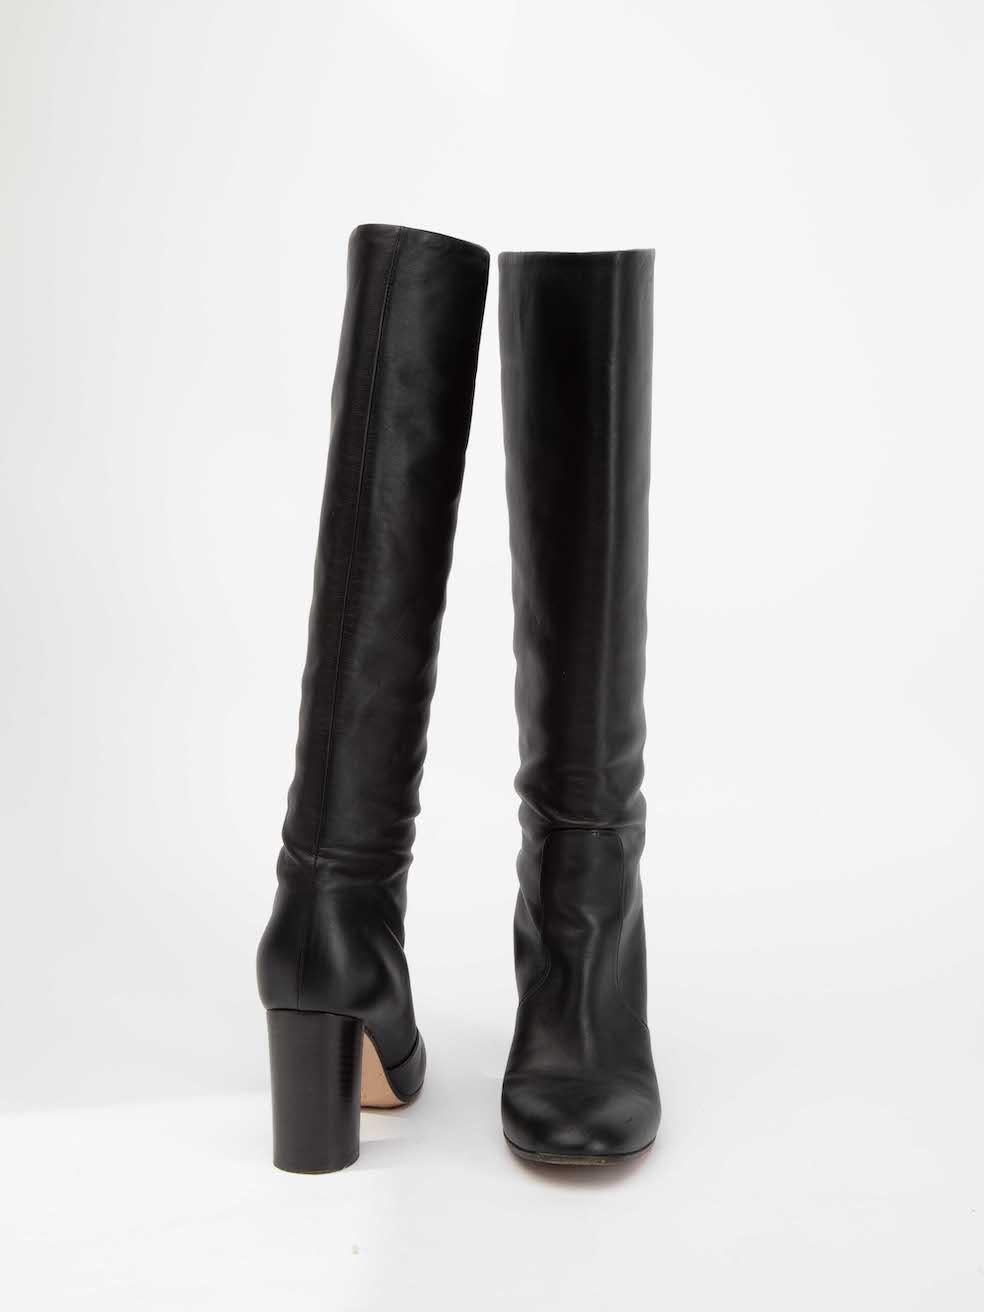 Gianvito Rossi Women's Black Leather Round Toe Knee High Boots In Good Condition For Sale In London, GB